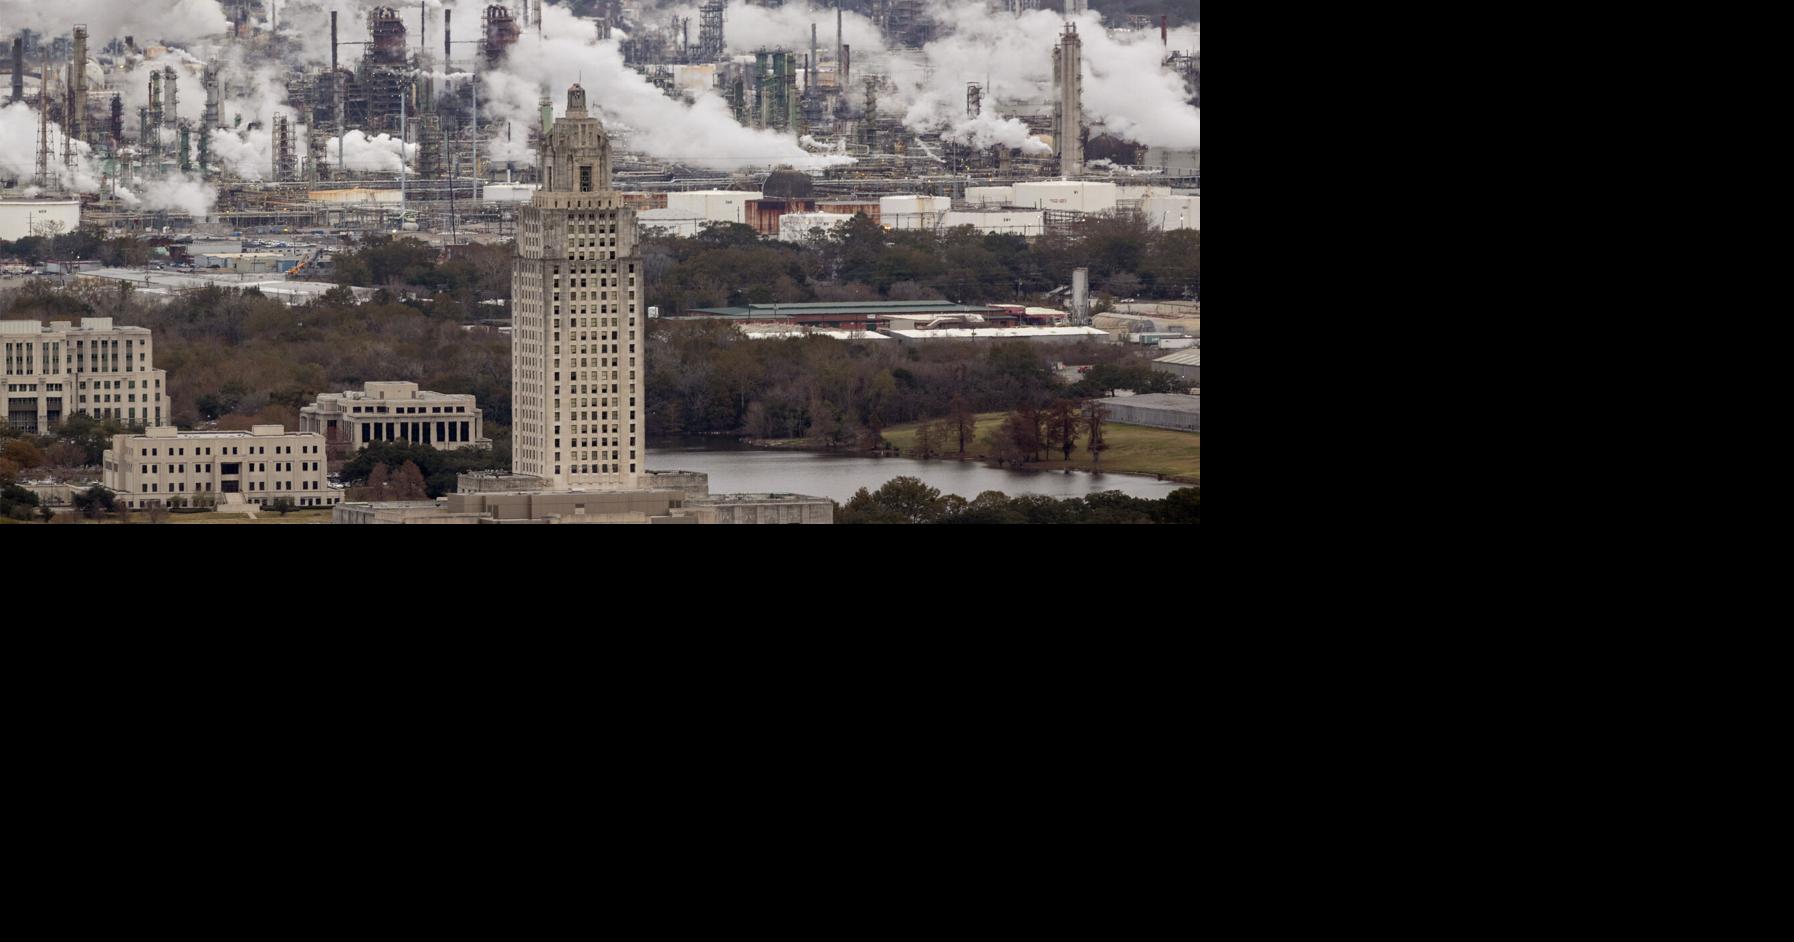 Louisiana has 8 of the worst water-polluting refineries in the country, study says